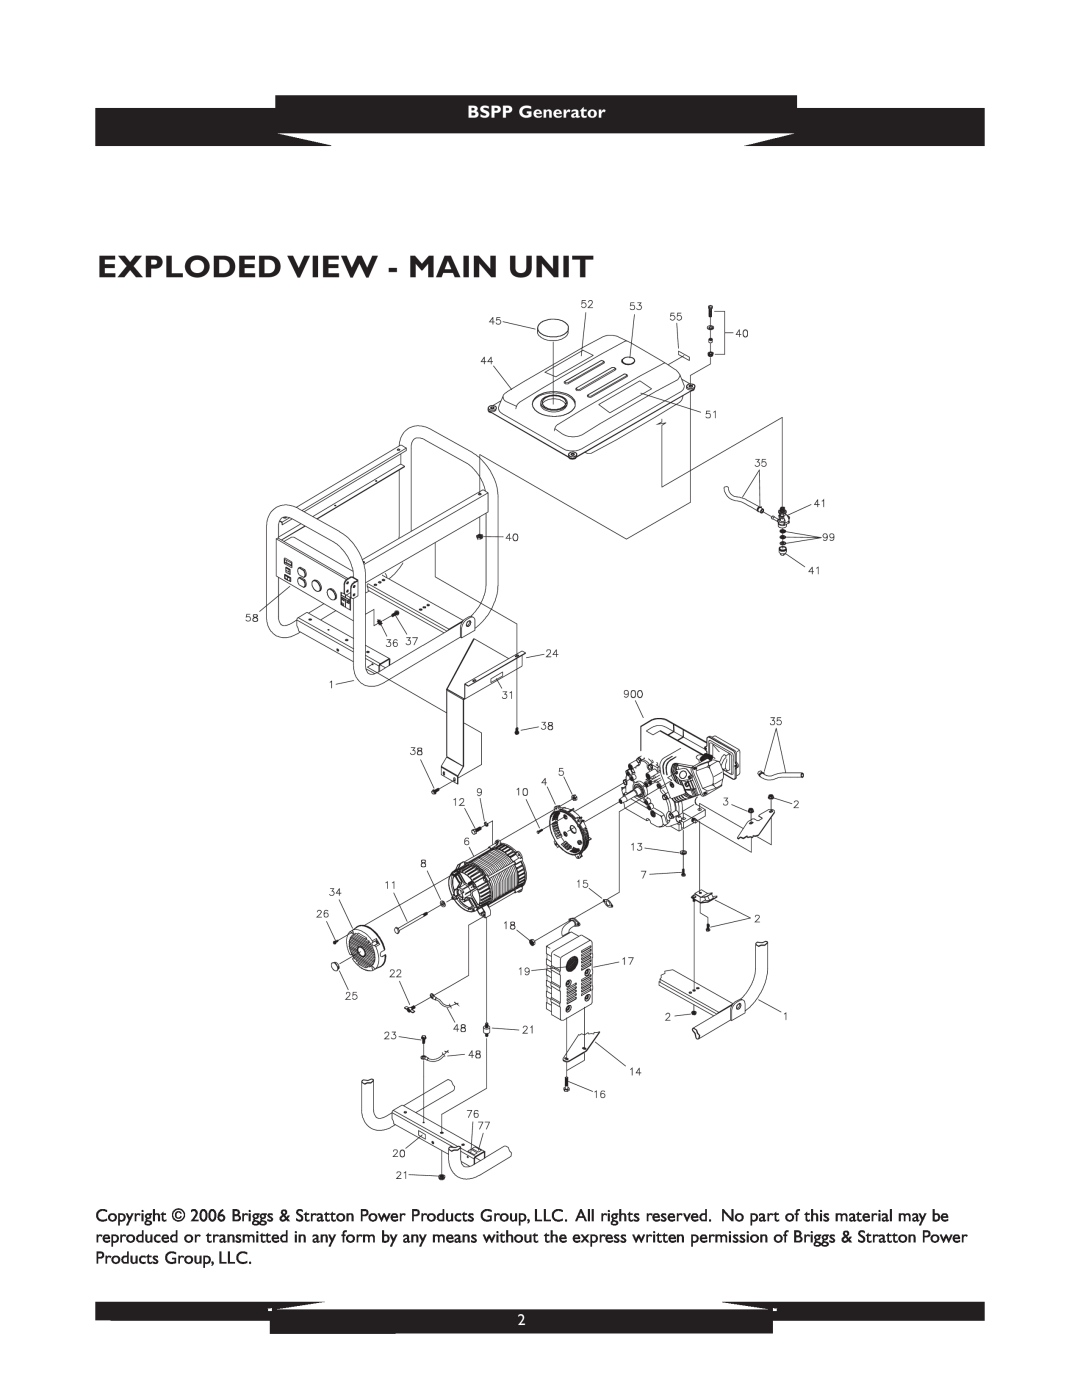 Briggs & Stratton 01933 manual Exploded View - Main Unit, BSPP Generator 